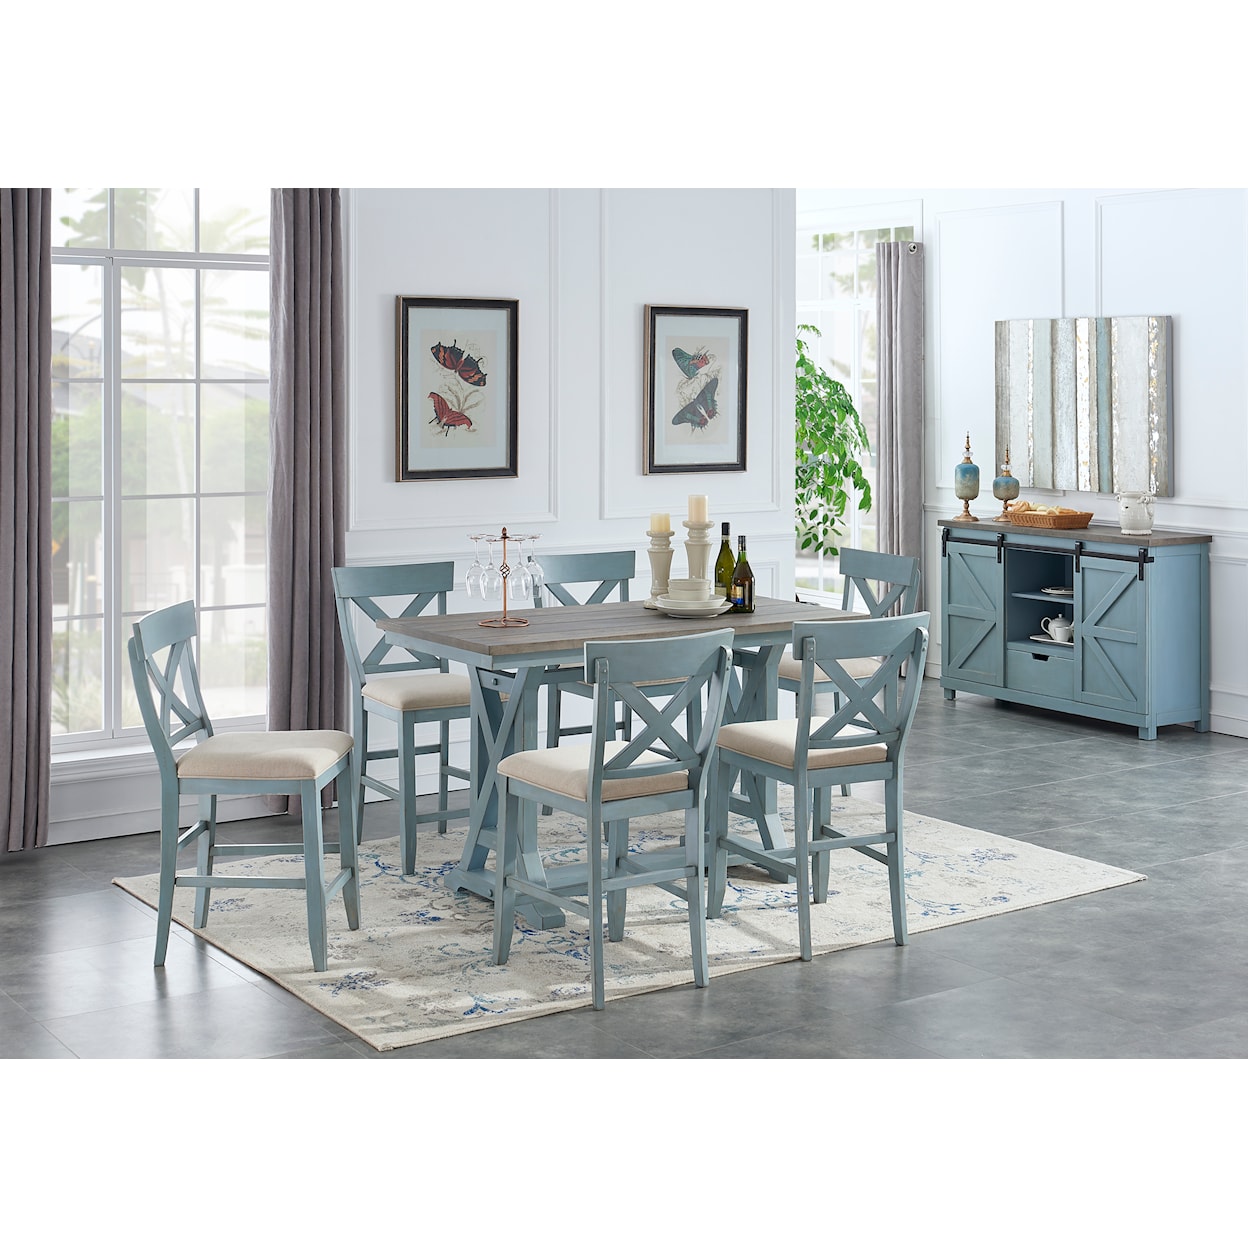 Carolina Accent Bar Harbor Counter-Height Dining Chair